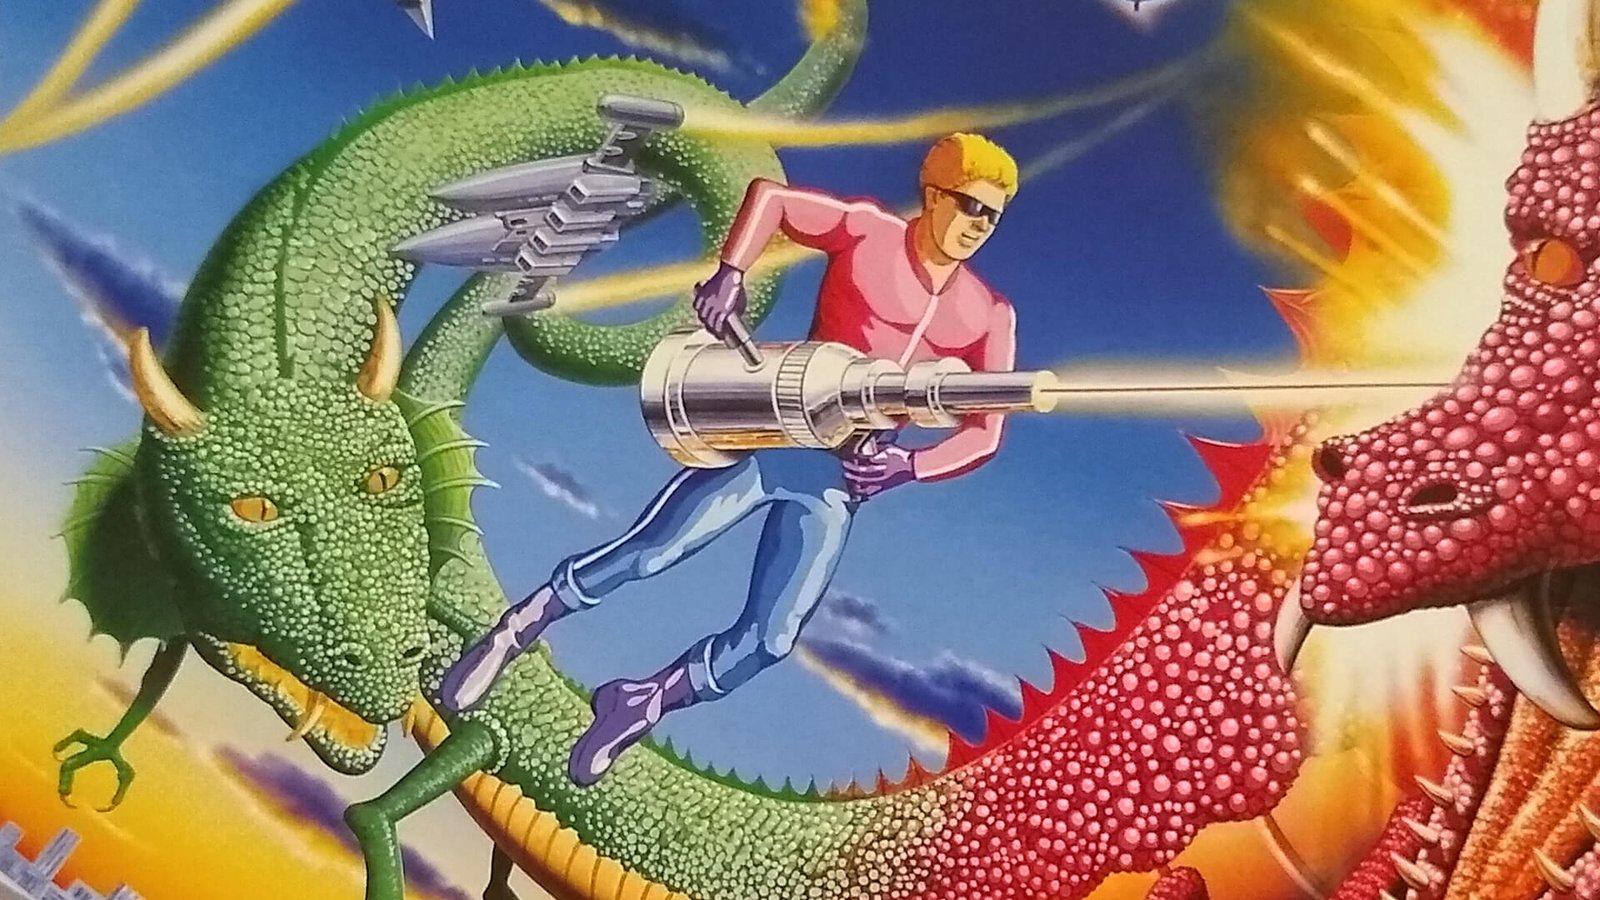 Review – Sega Ages: Space Harrier